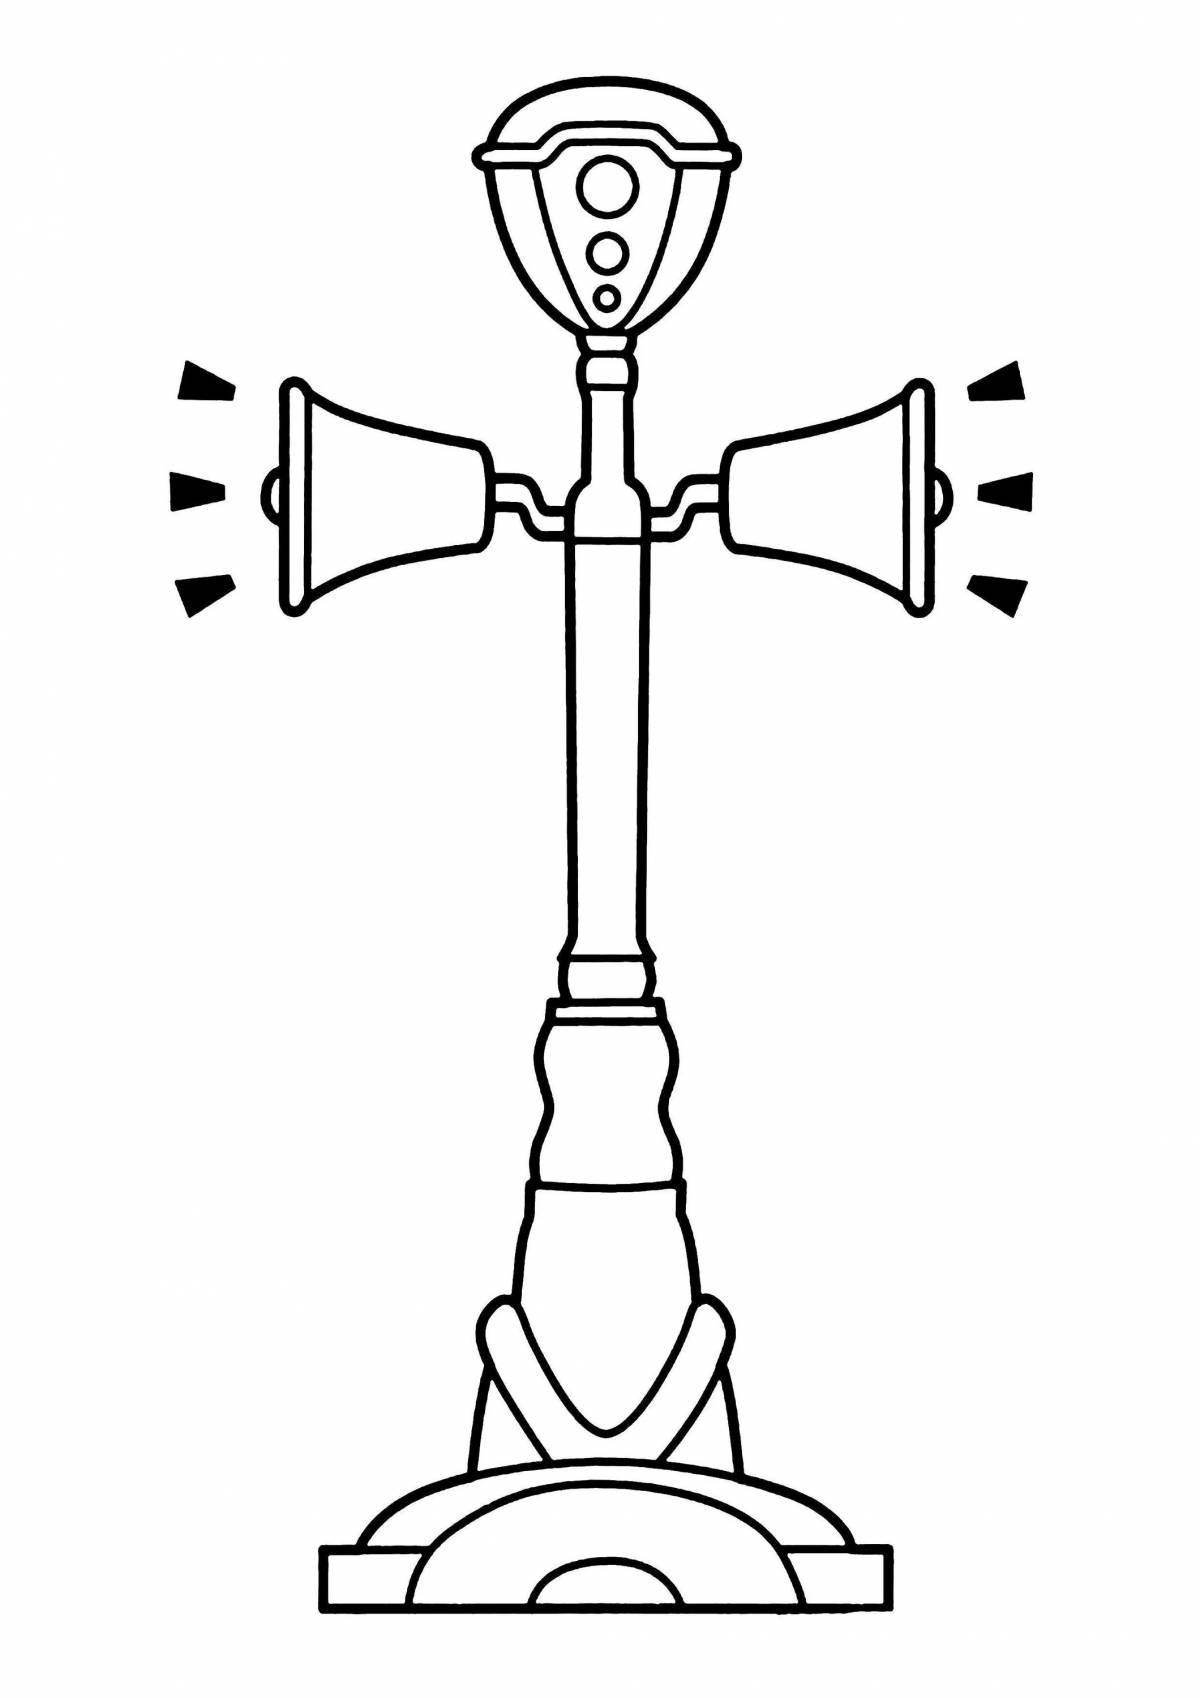 Coloring pipehead coloring page